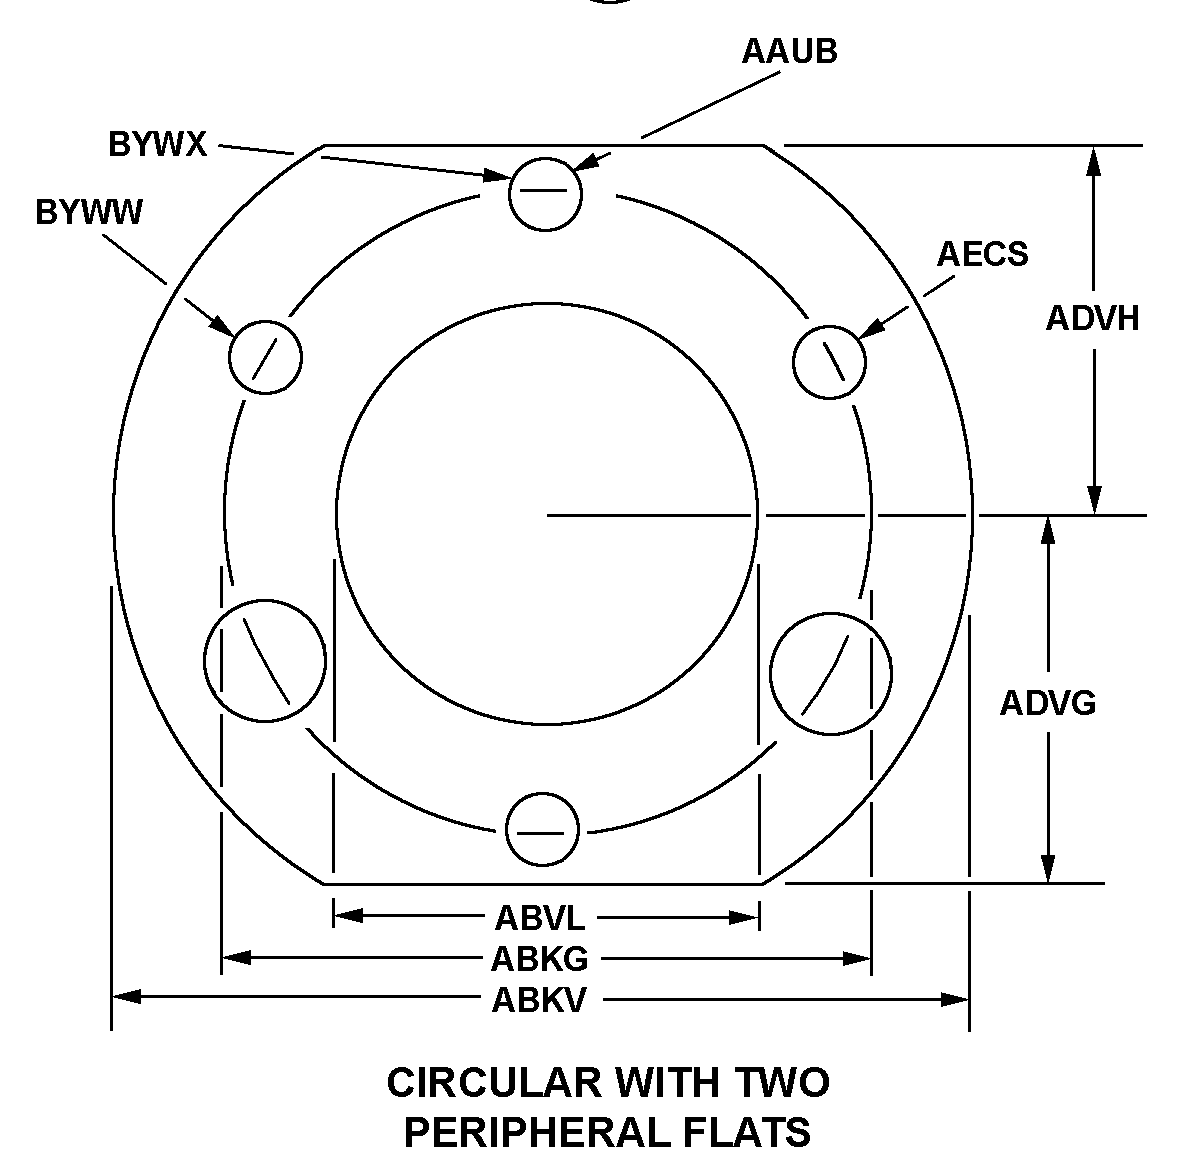 CIRCULAR WITH TWO PERIPHERAL FLATS style nsn 5330-00-373-4925